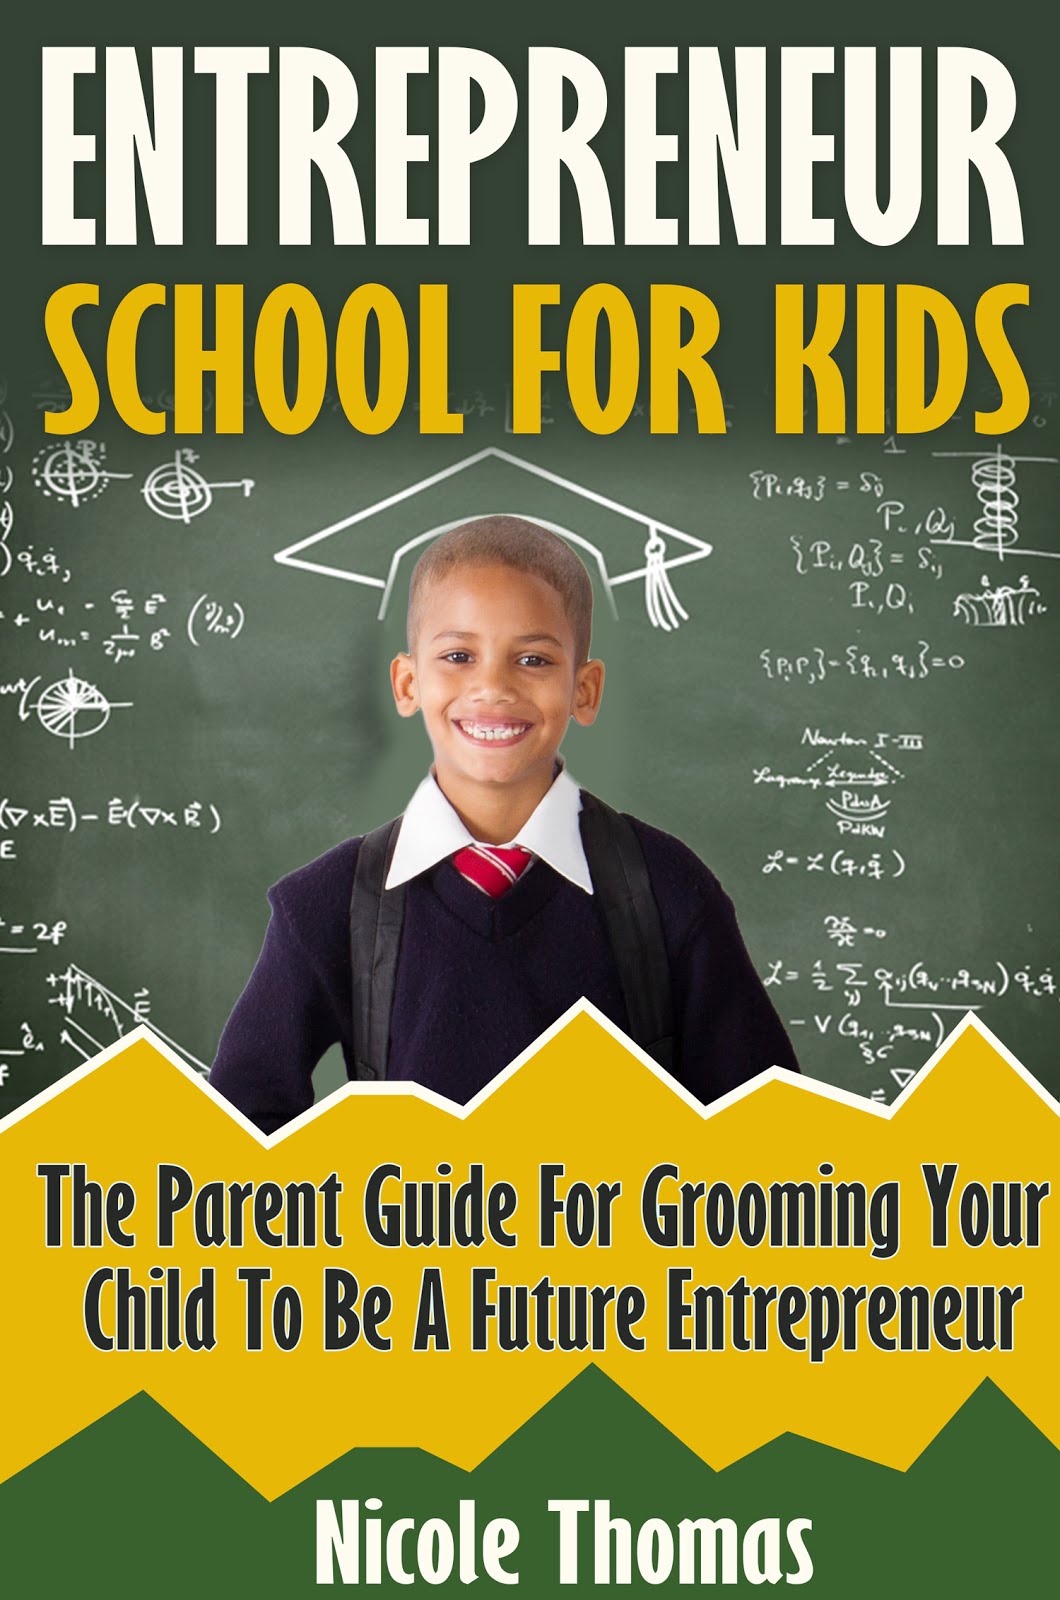 "A Simple Practical Guide For Parents!"